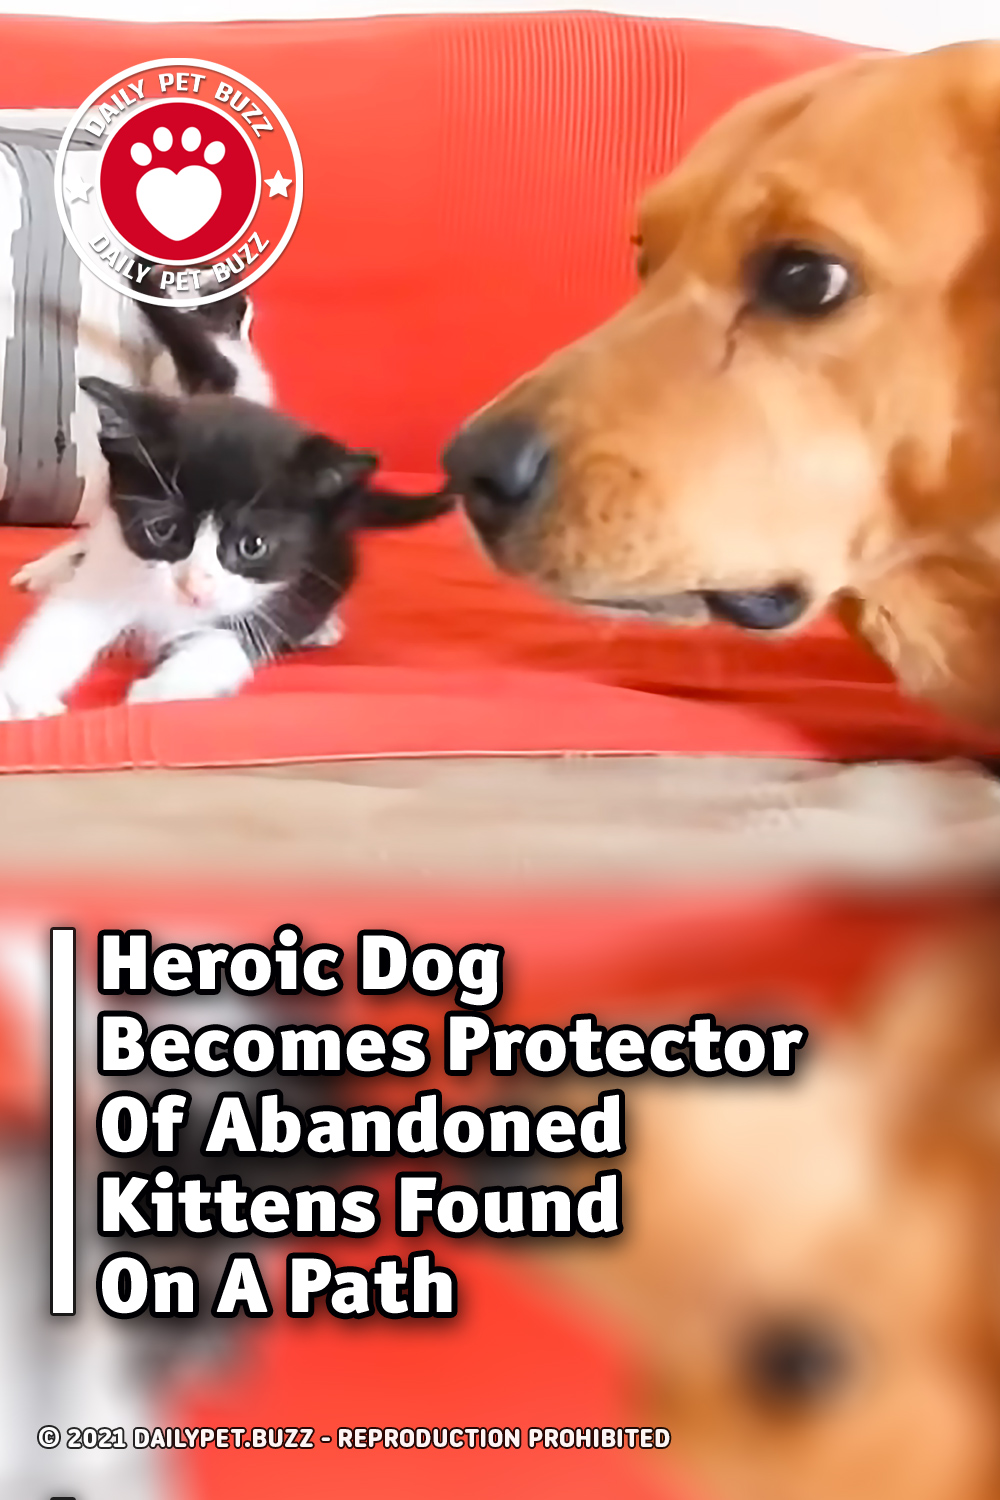 Heroic Dog Becomes Protector Of Abandoned Kittens Found On A Path